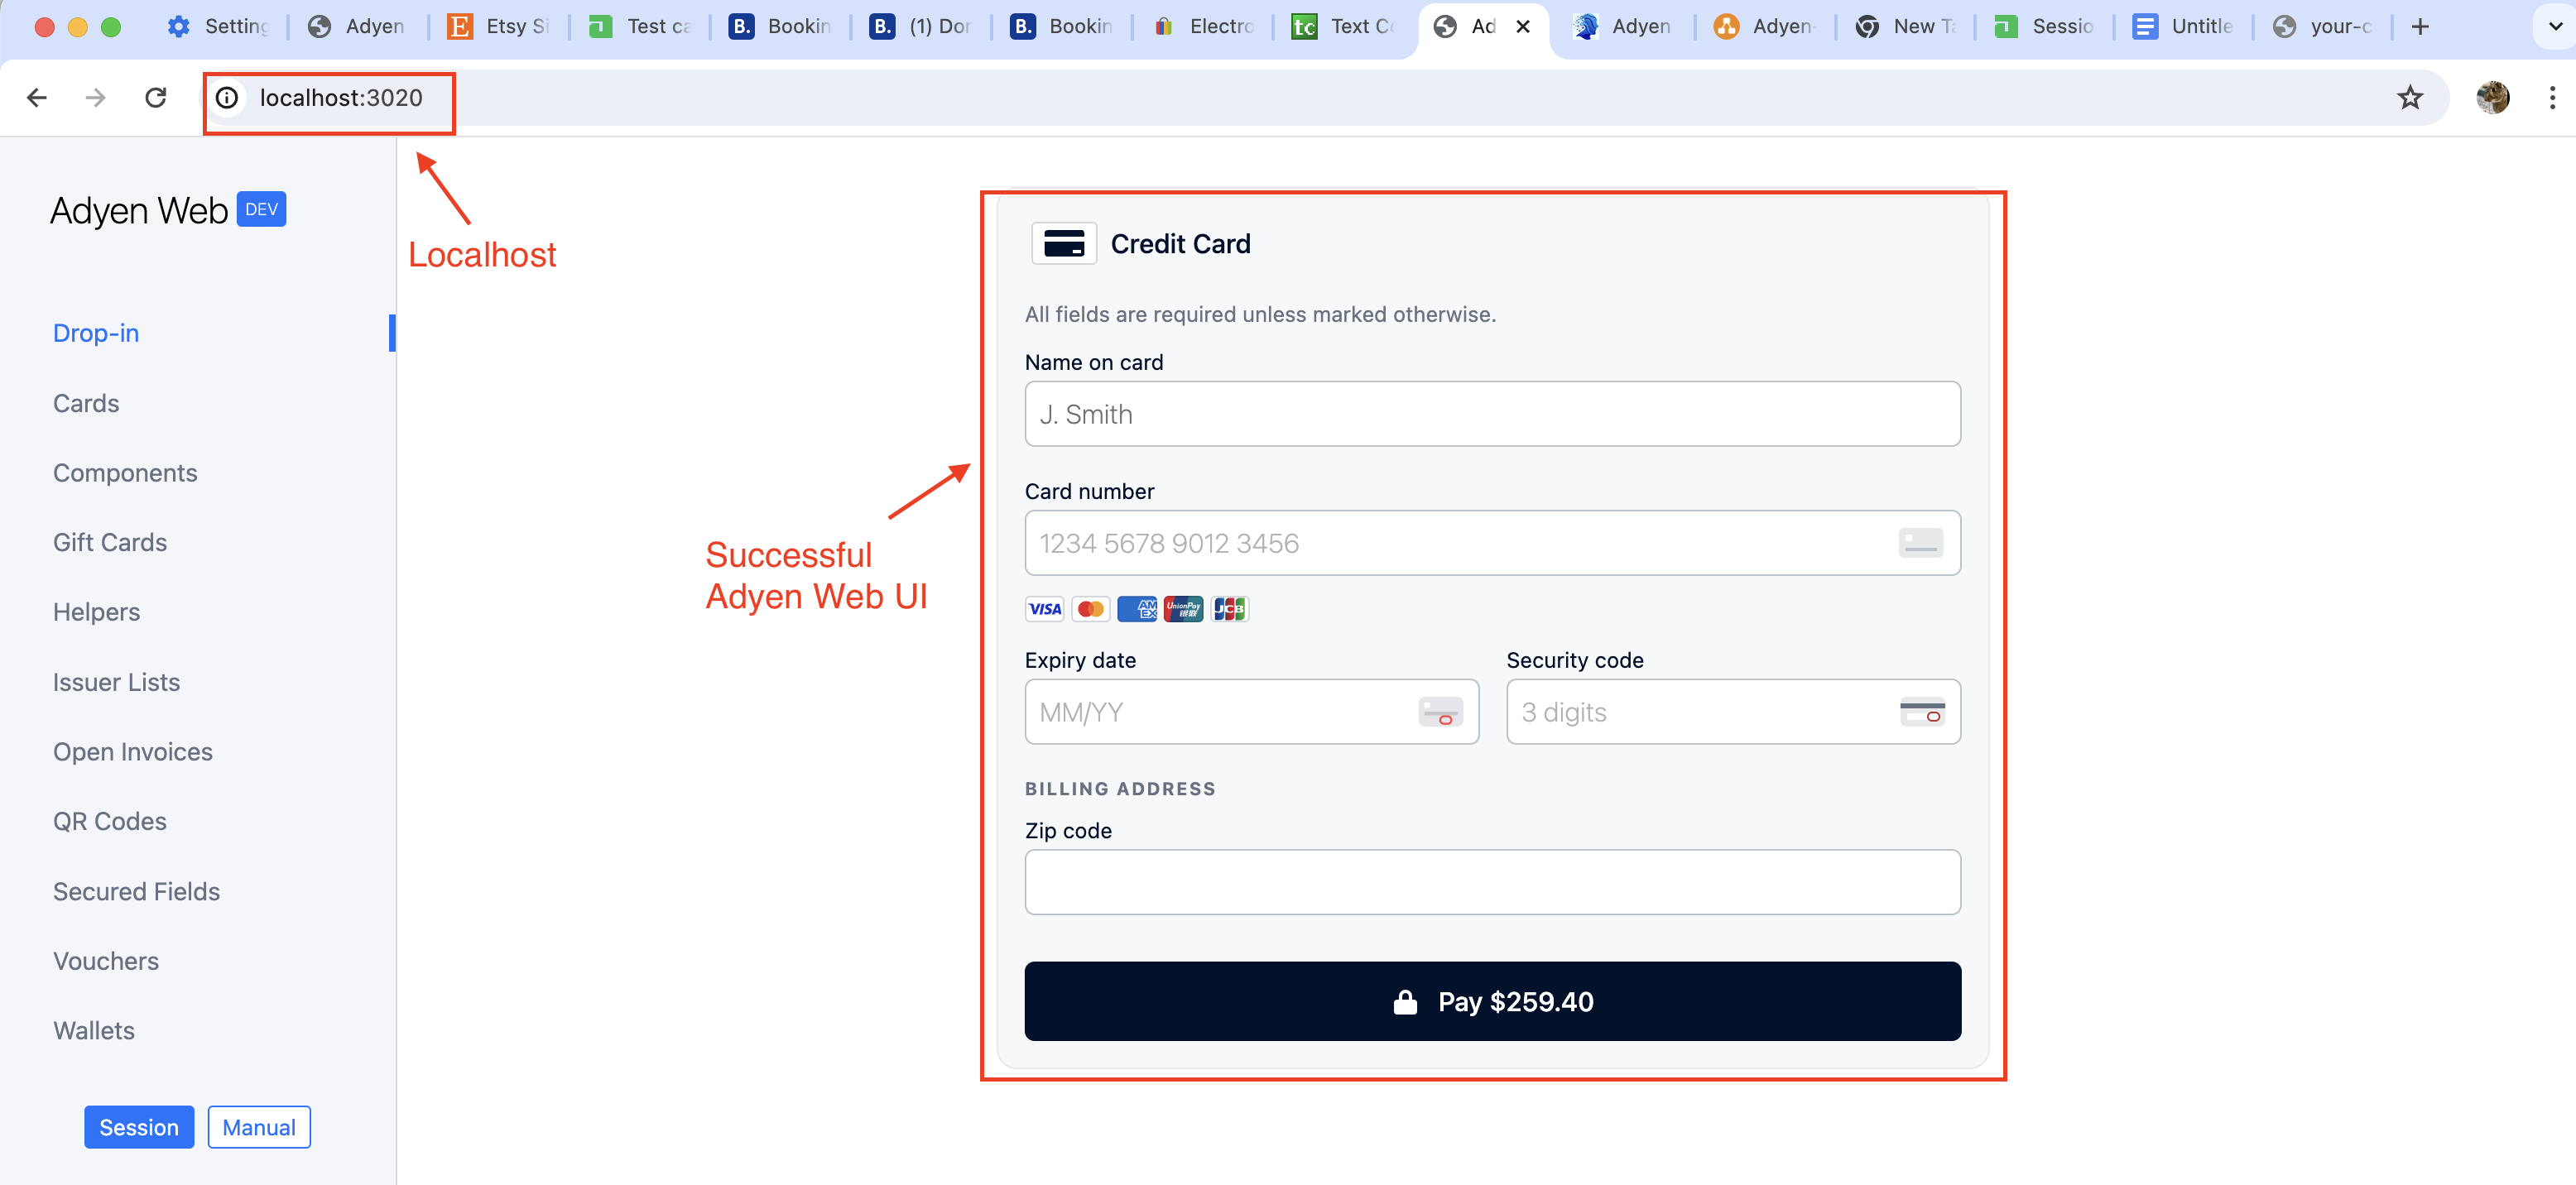 Adyen Web UI locally hosted, accessed successfully in browser